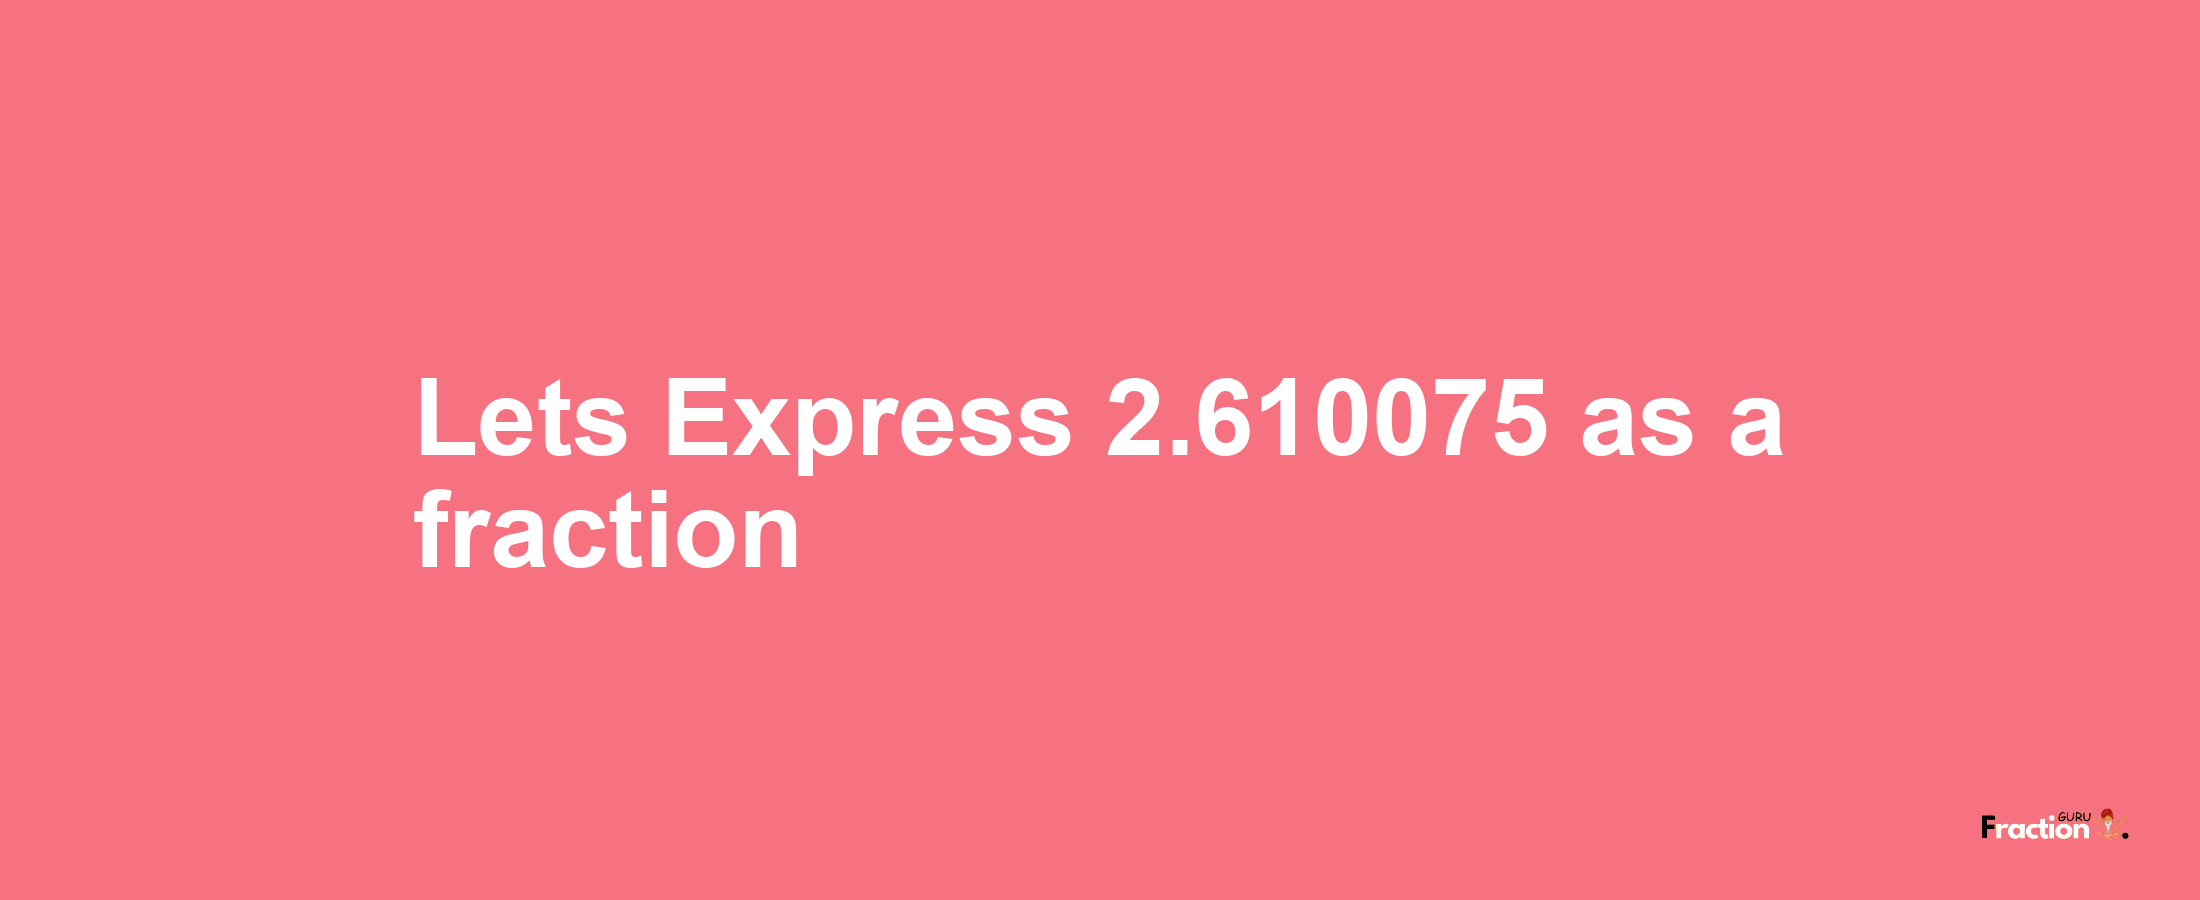 Lets Express 2.610075 as afraction